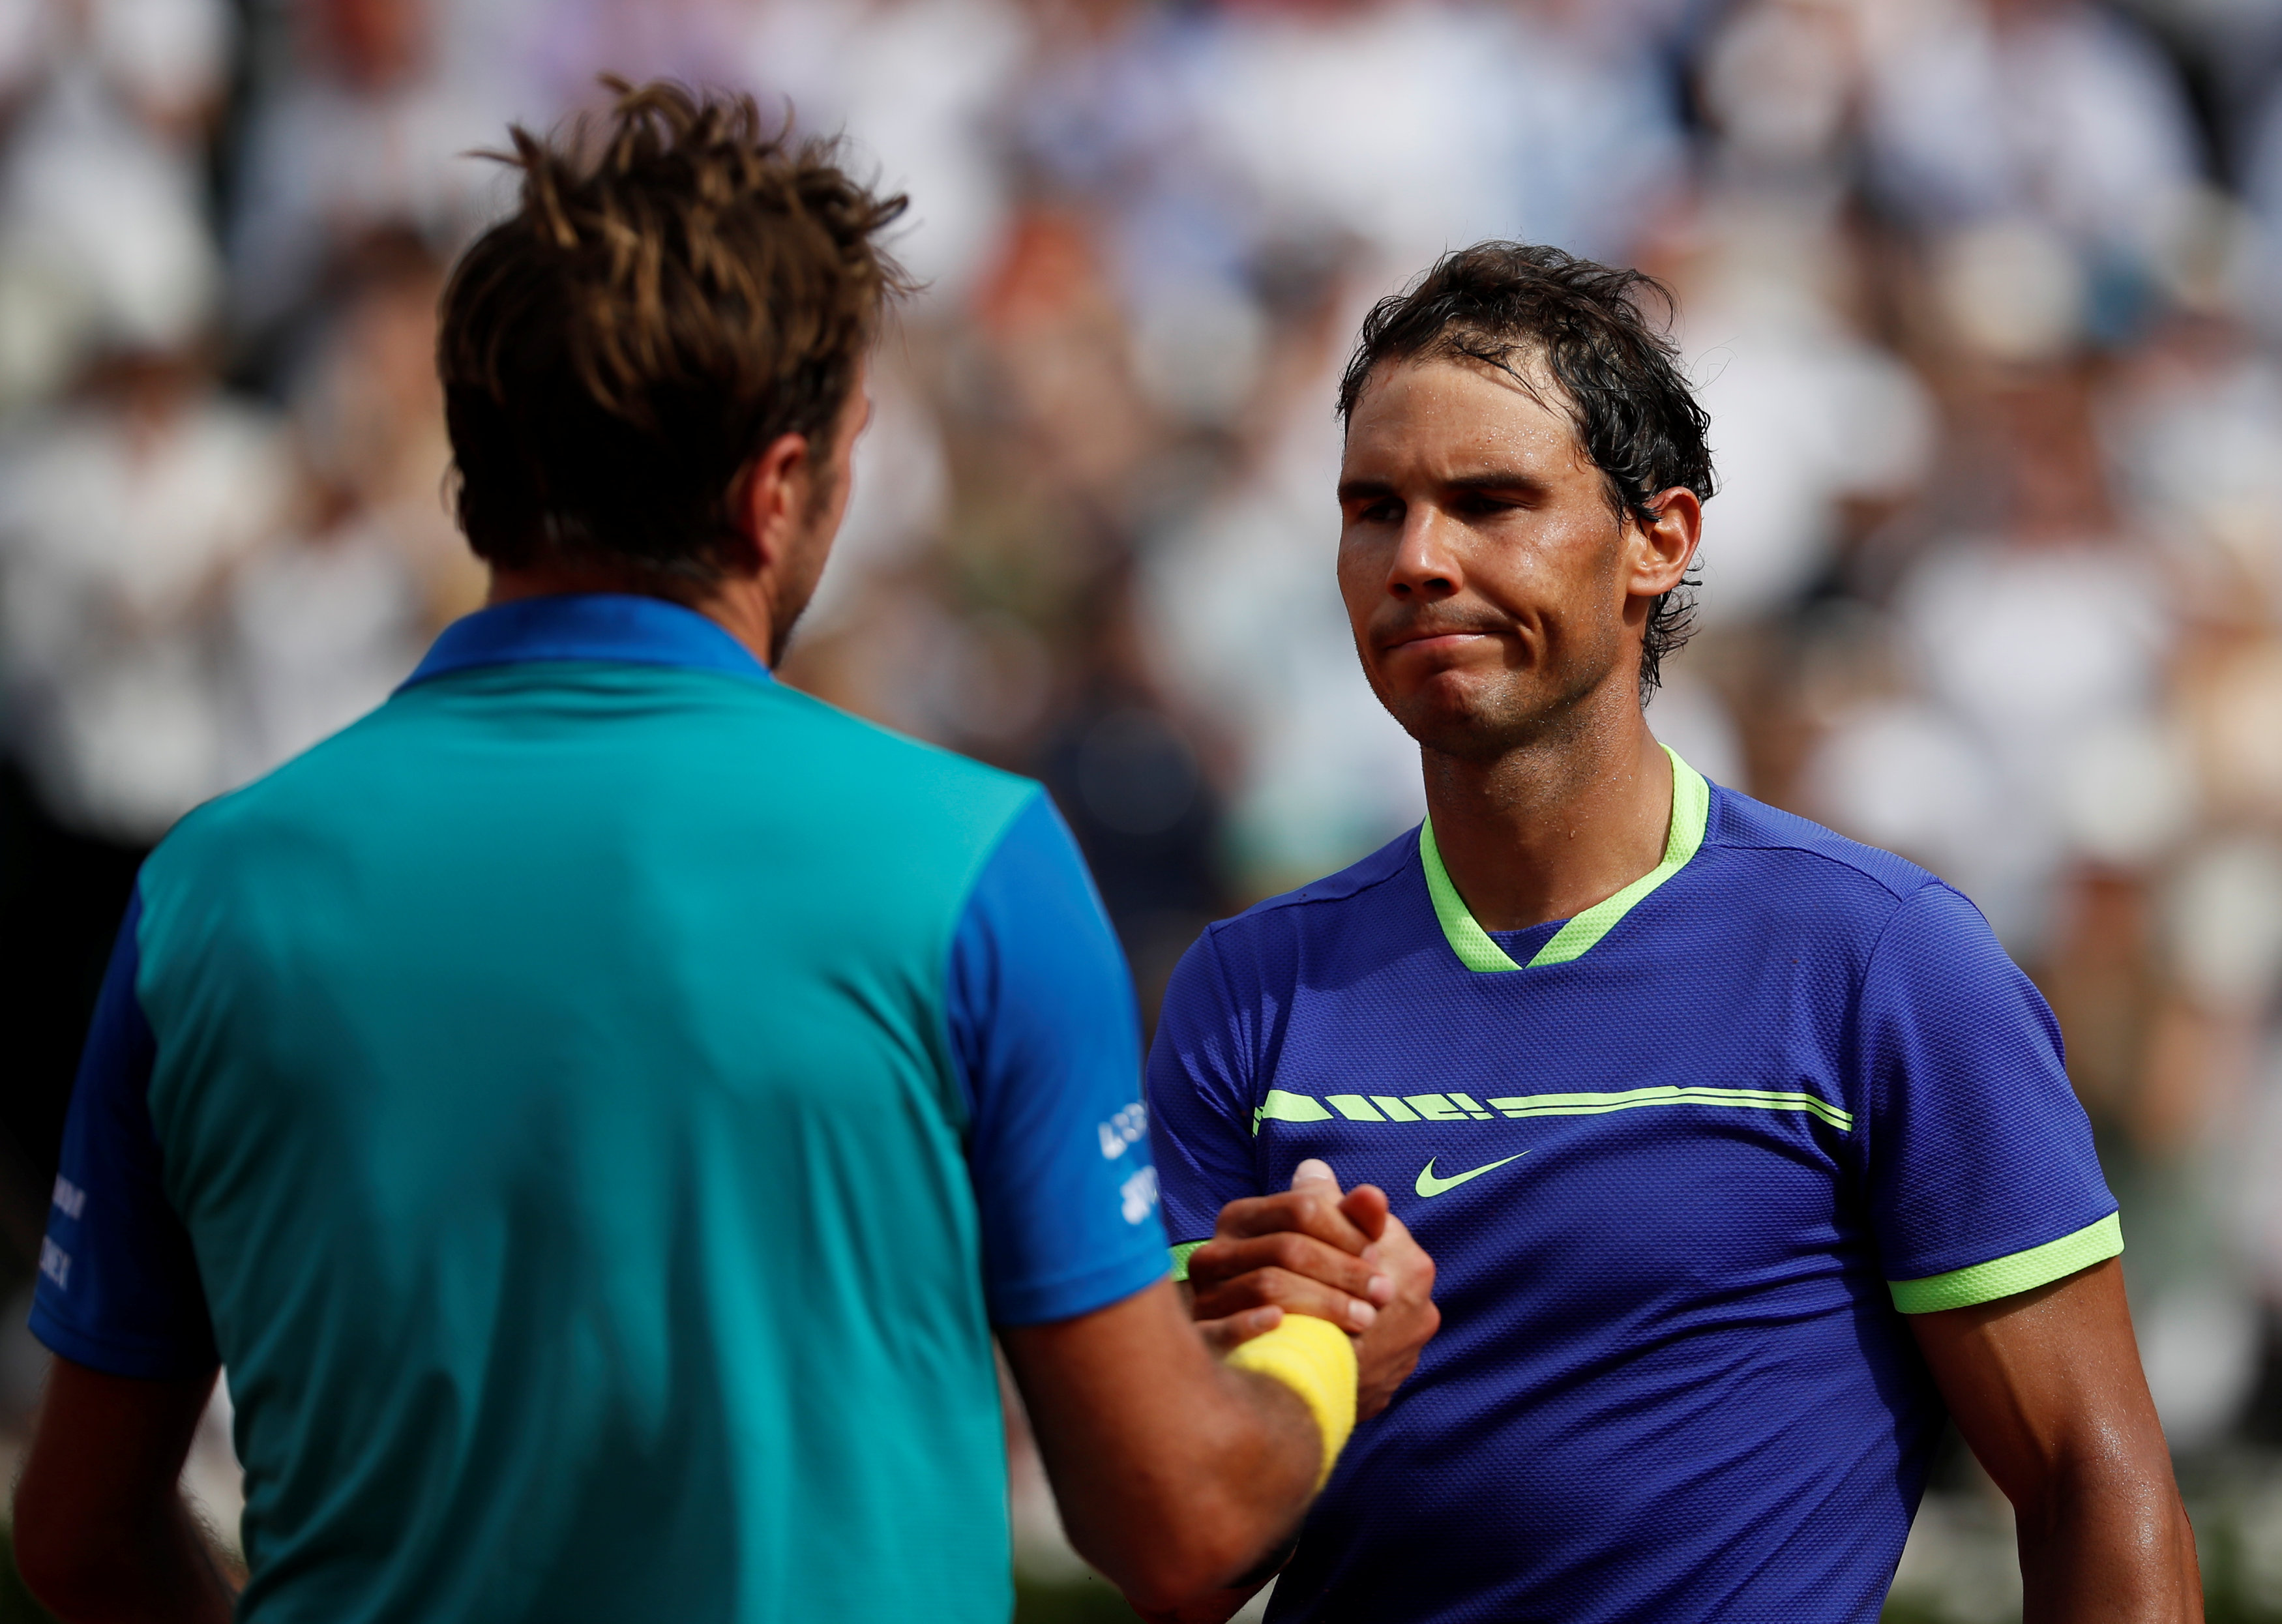 Tennis: Nadal destroys Wawrinka to claim 10th French Open title